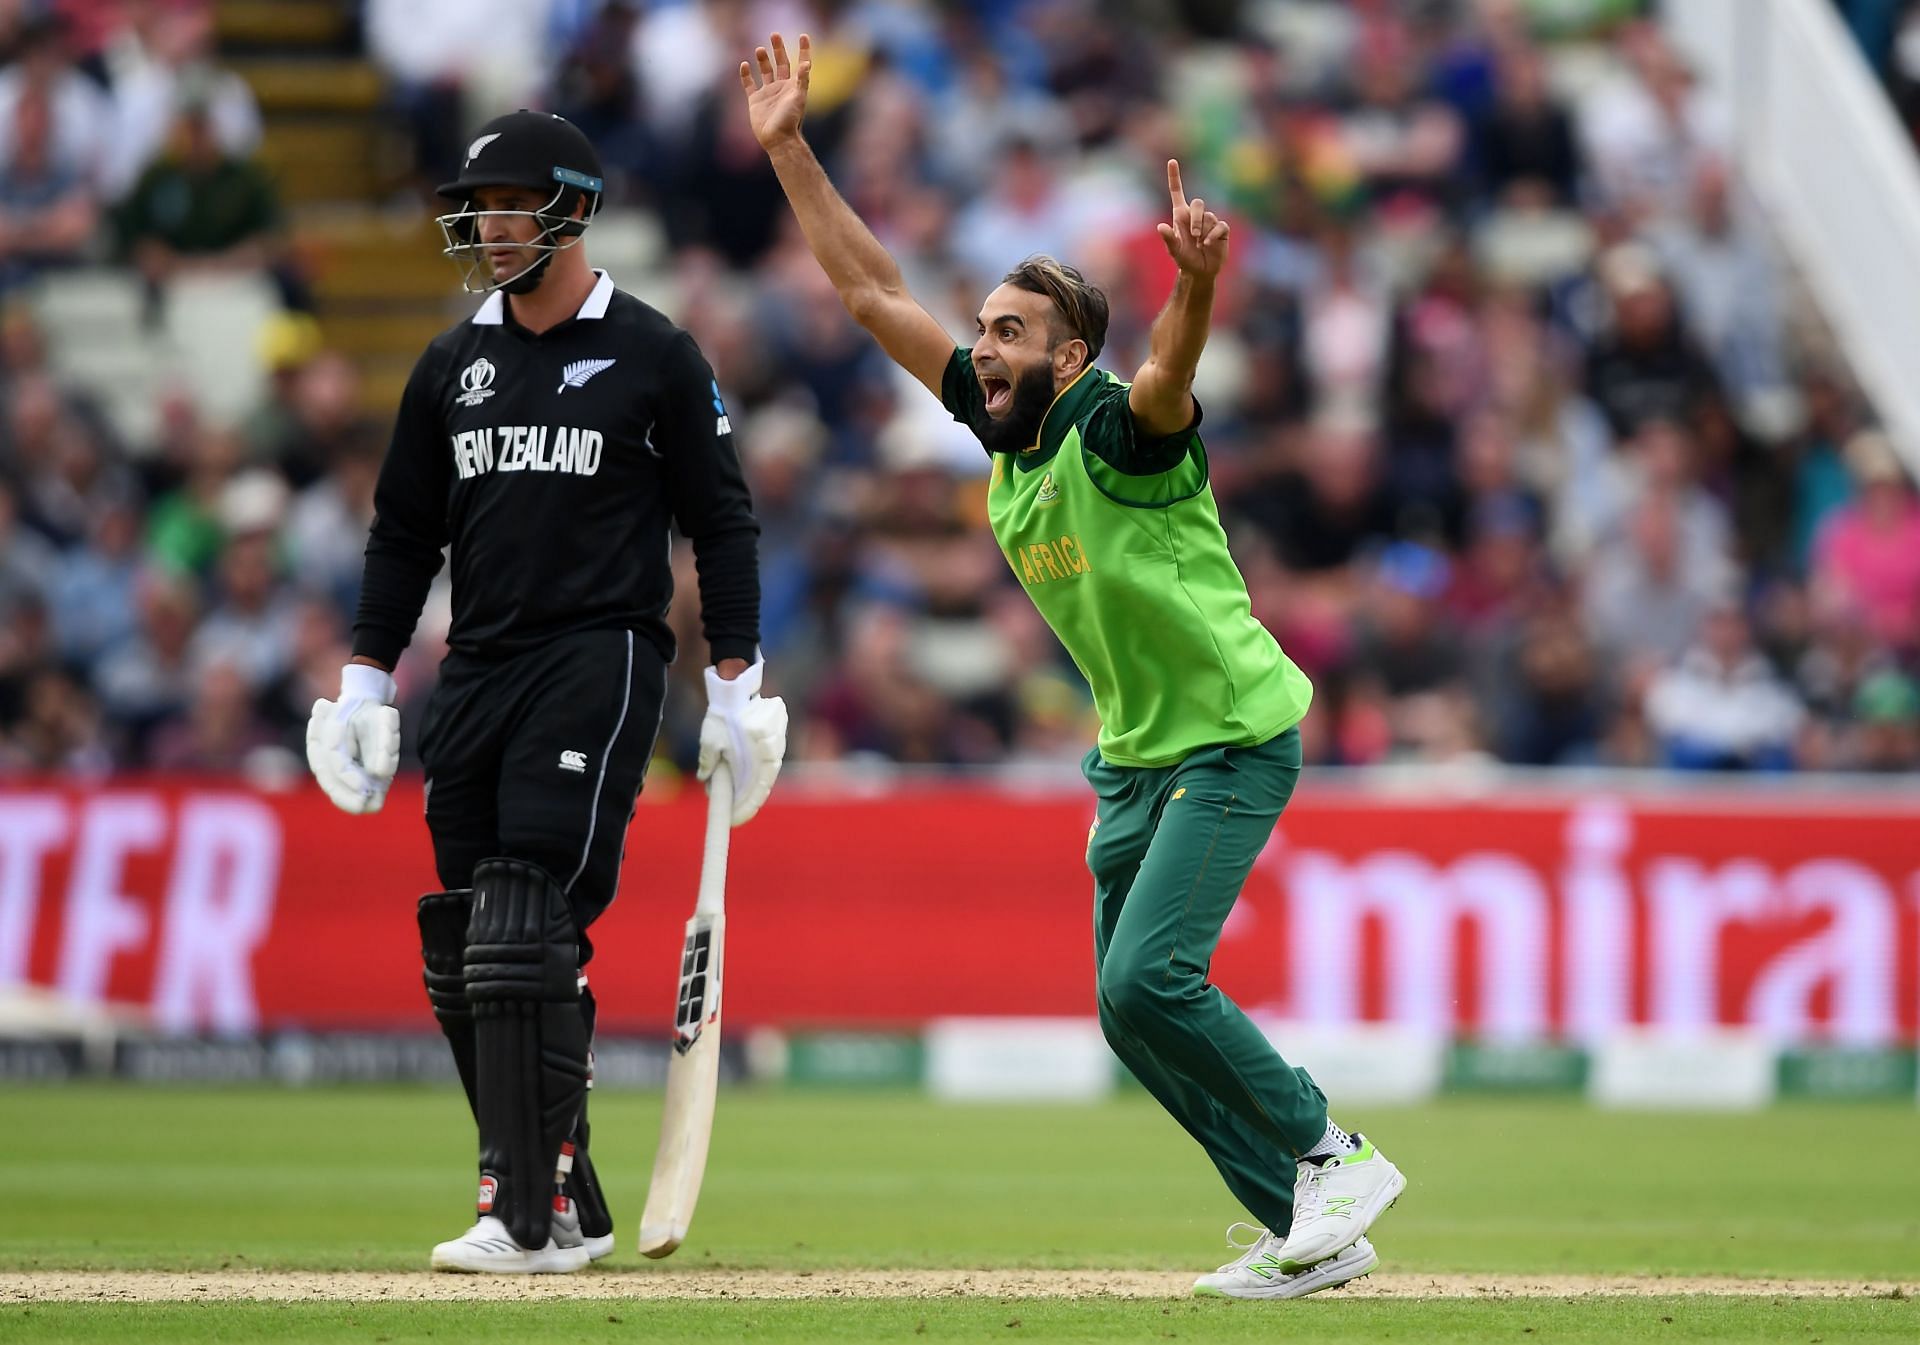 Imran Tahir in action against New Zealand at the ICC Cricket World Cup 2019.